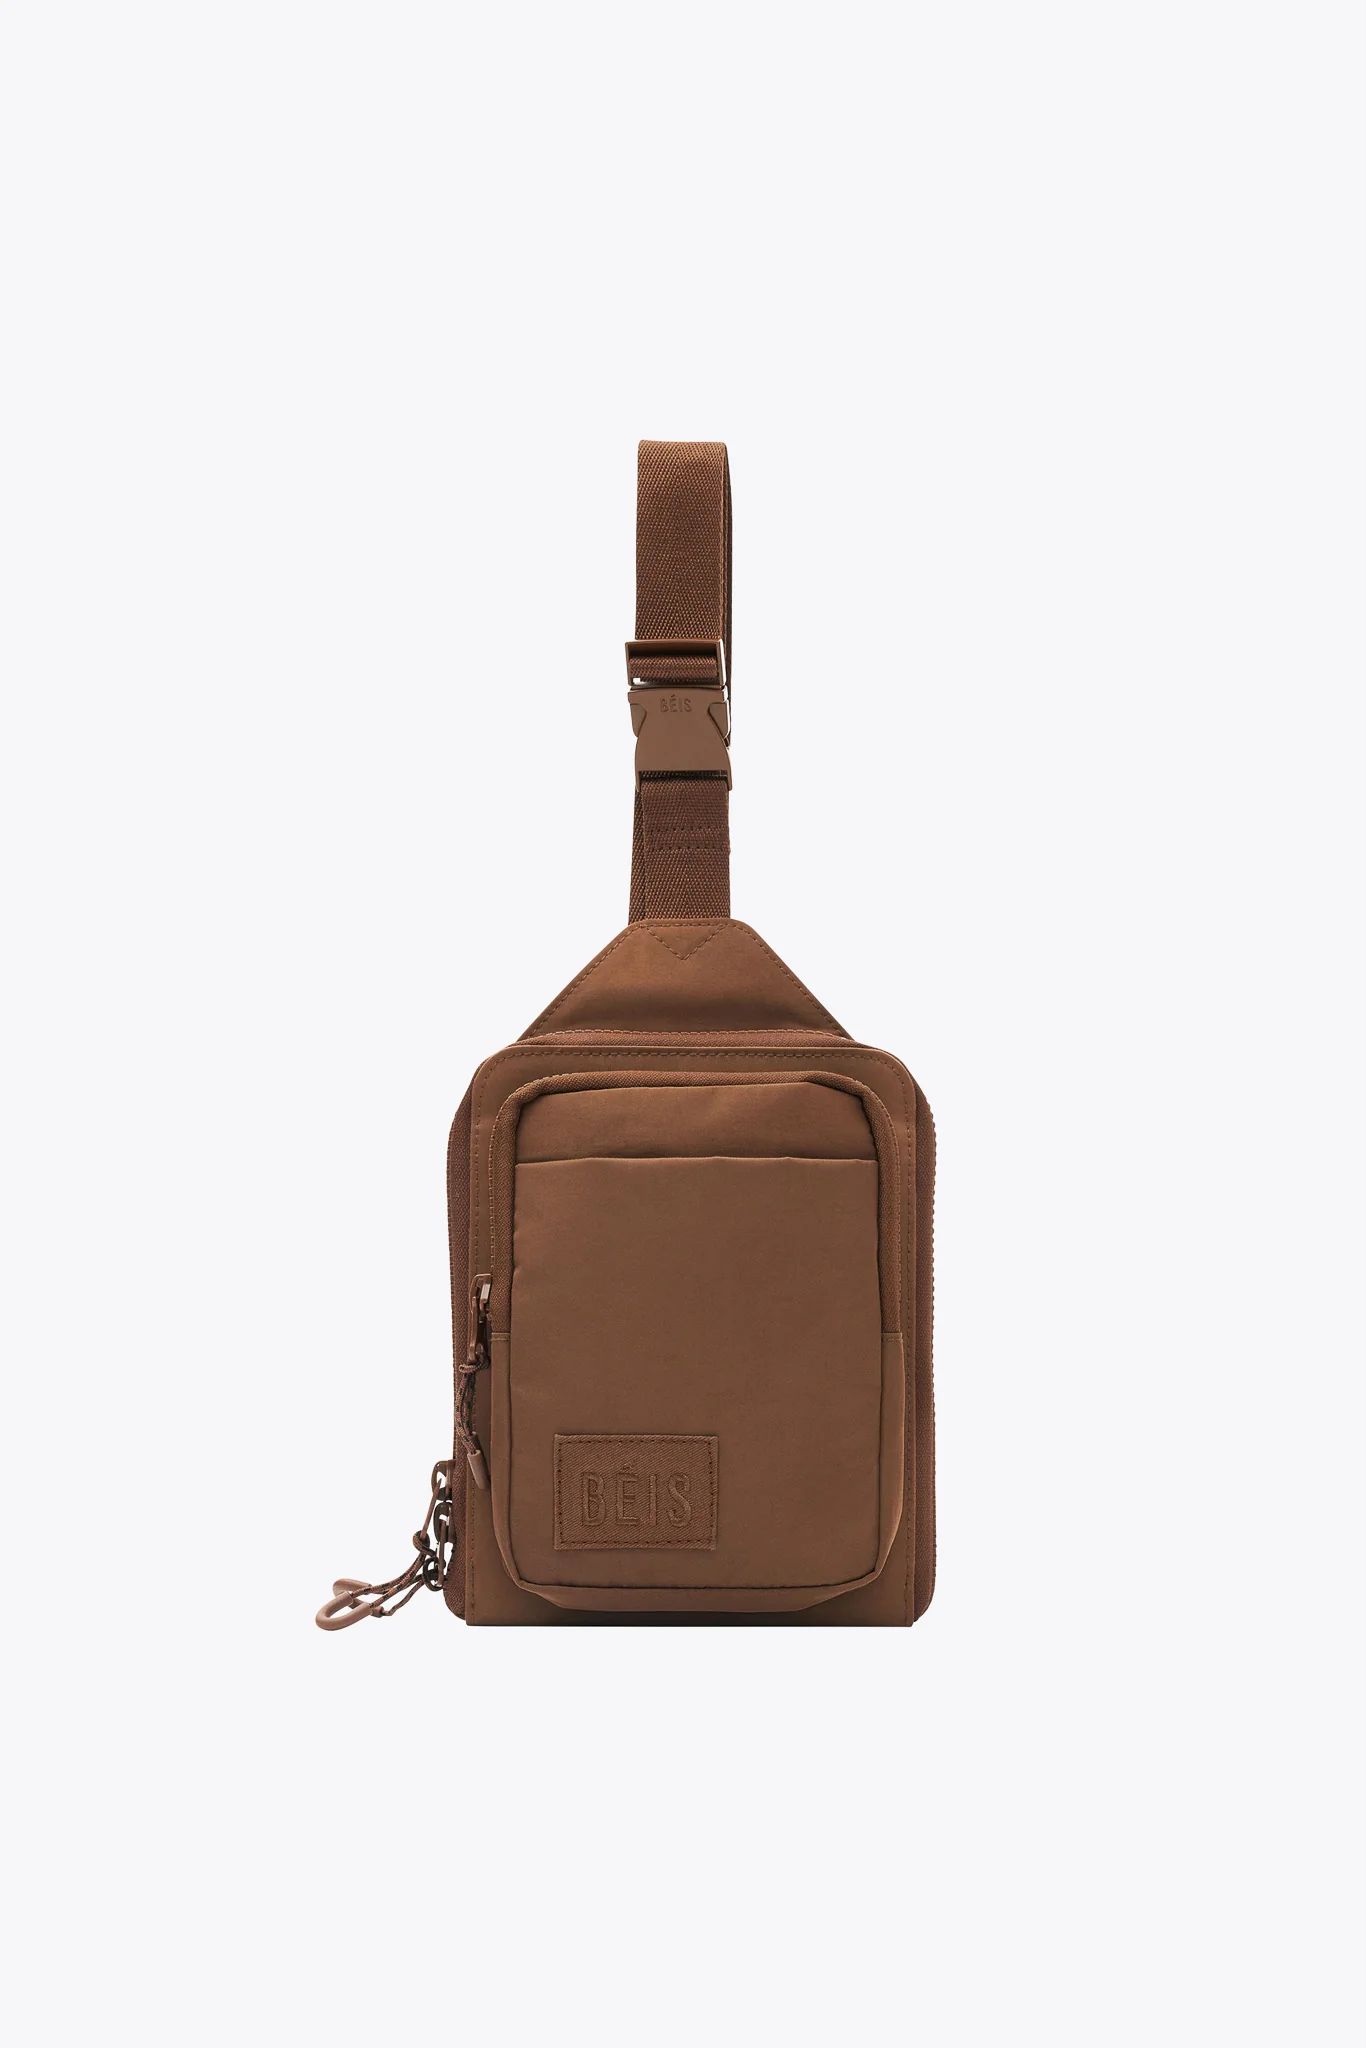 The Sport Sling in Maple | BÉIS Travel